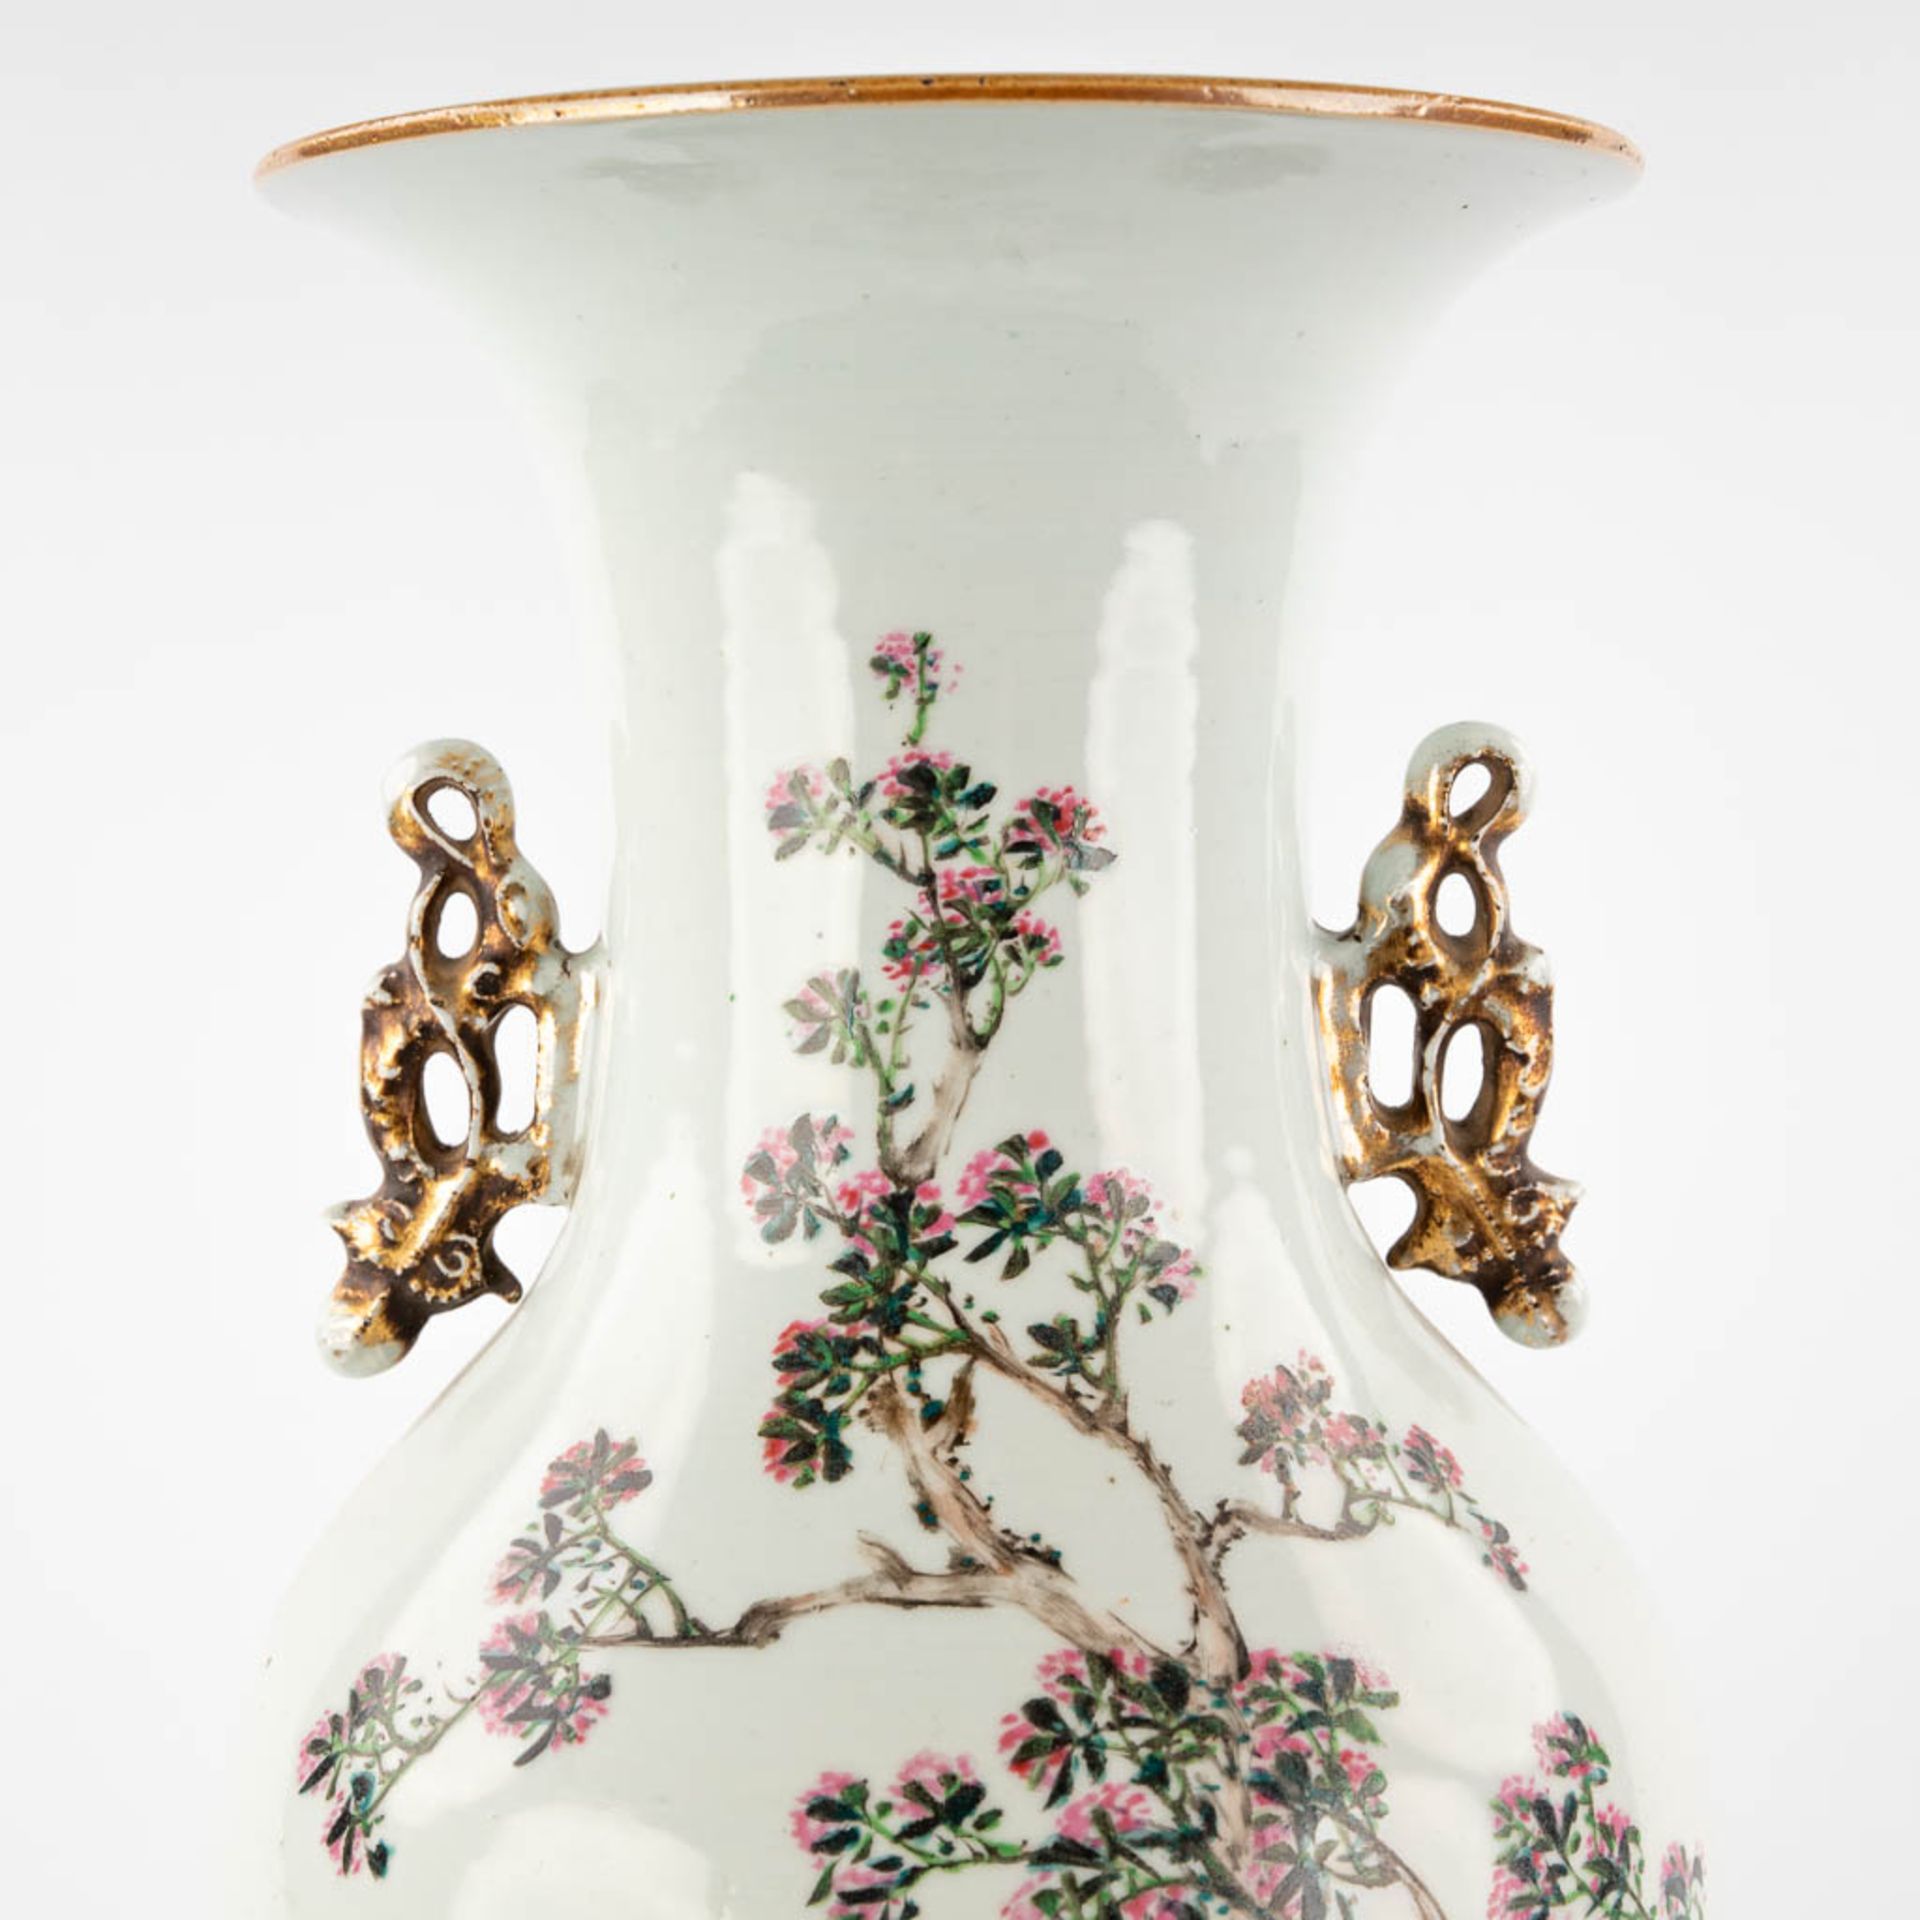 A Chinese vase decorated with ladies and calligraphic texts. 19th/20th C. (H:58 x D:22 cm) - Image 9 of 12